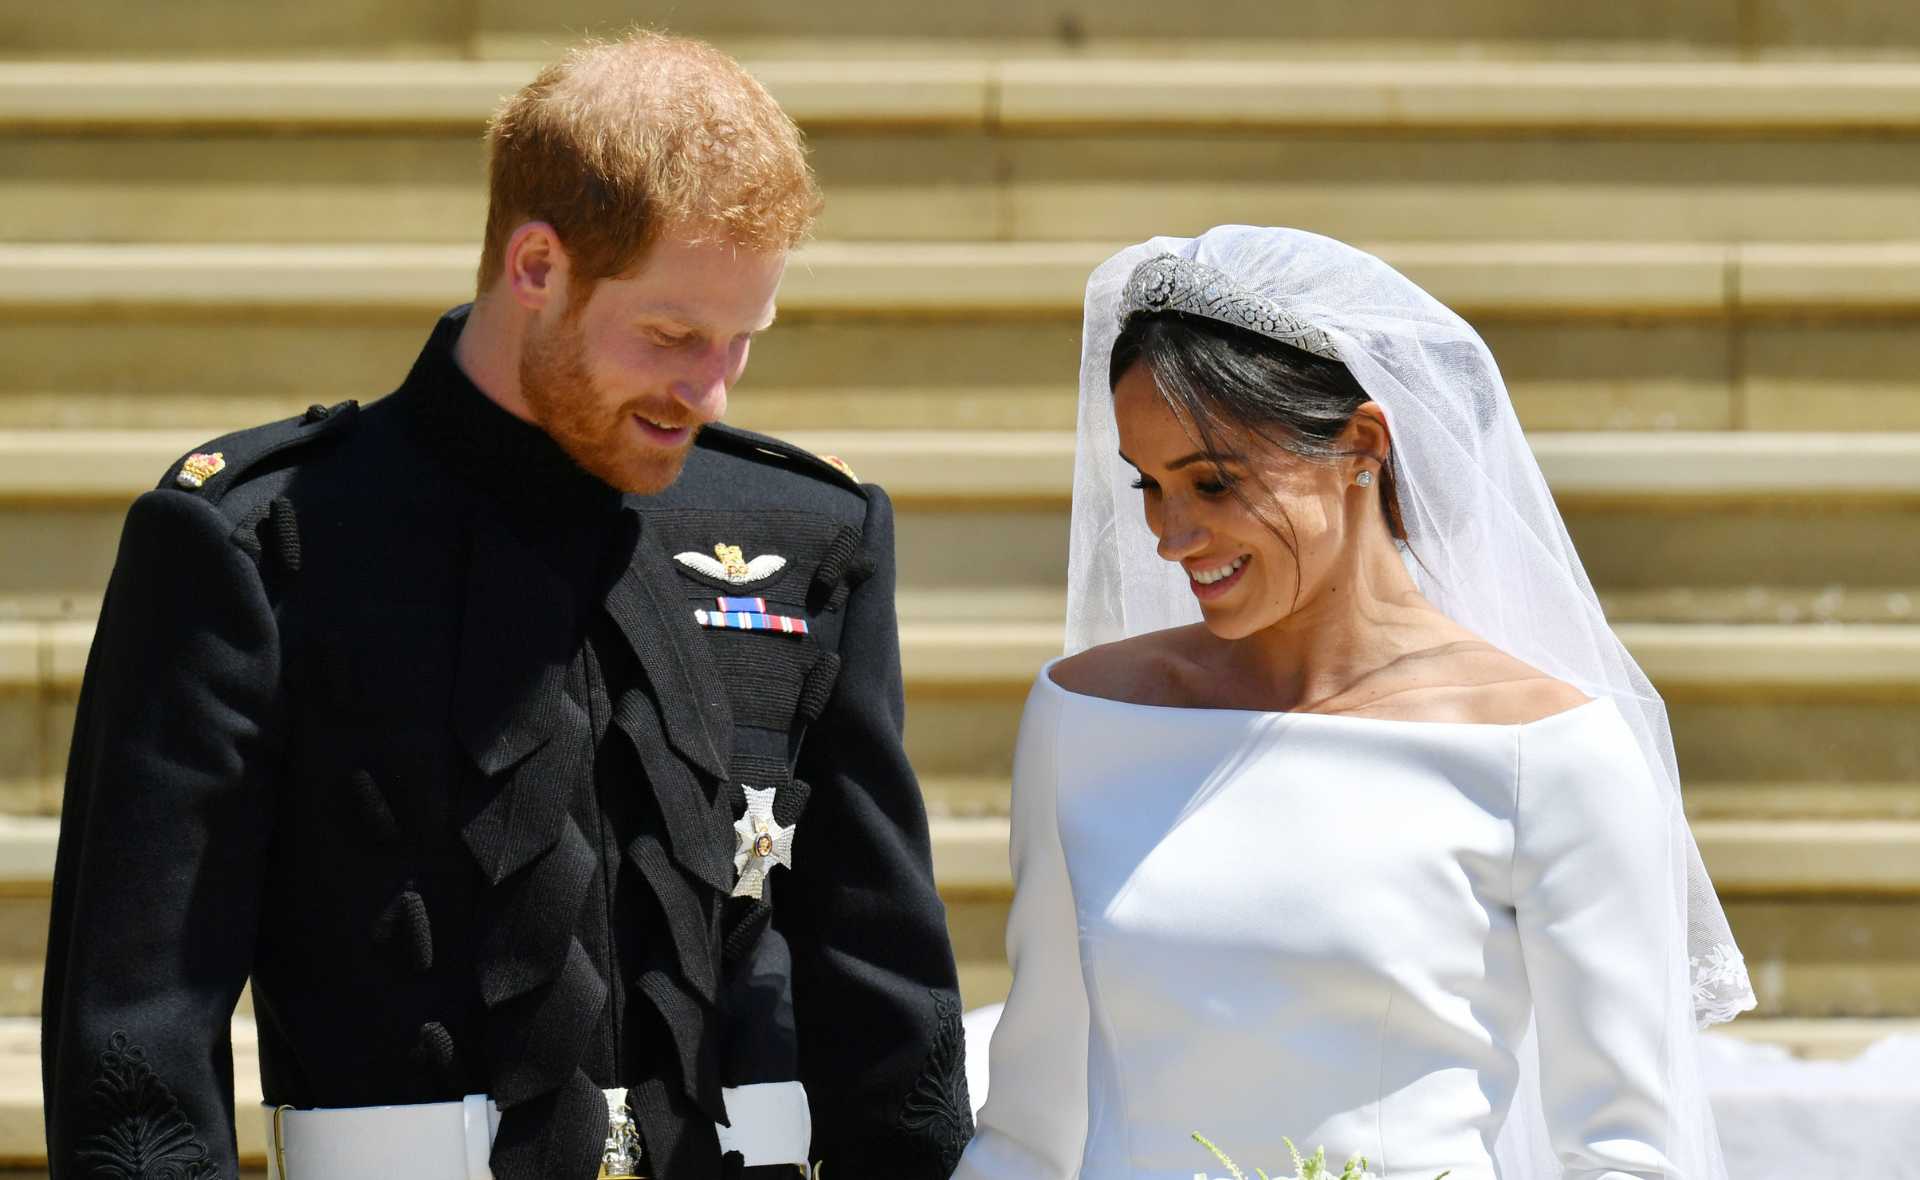 Harry and Meghan’s wedding made history, but there were subtle clues they’d never be your average royal couple